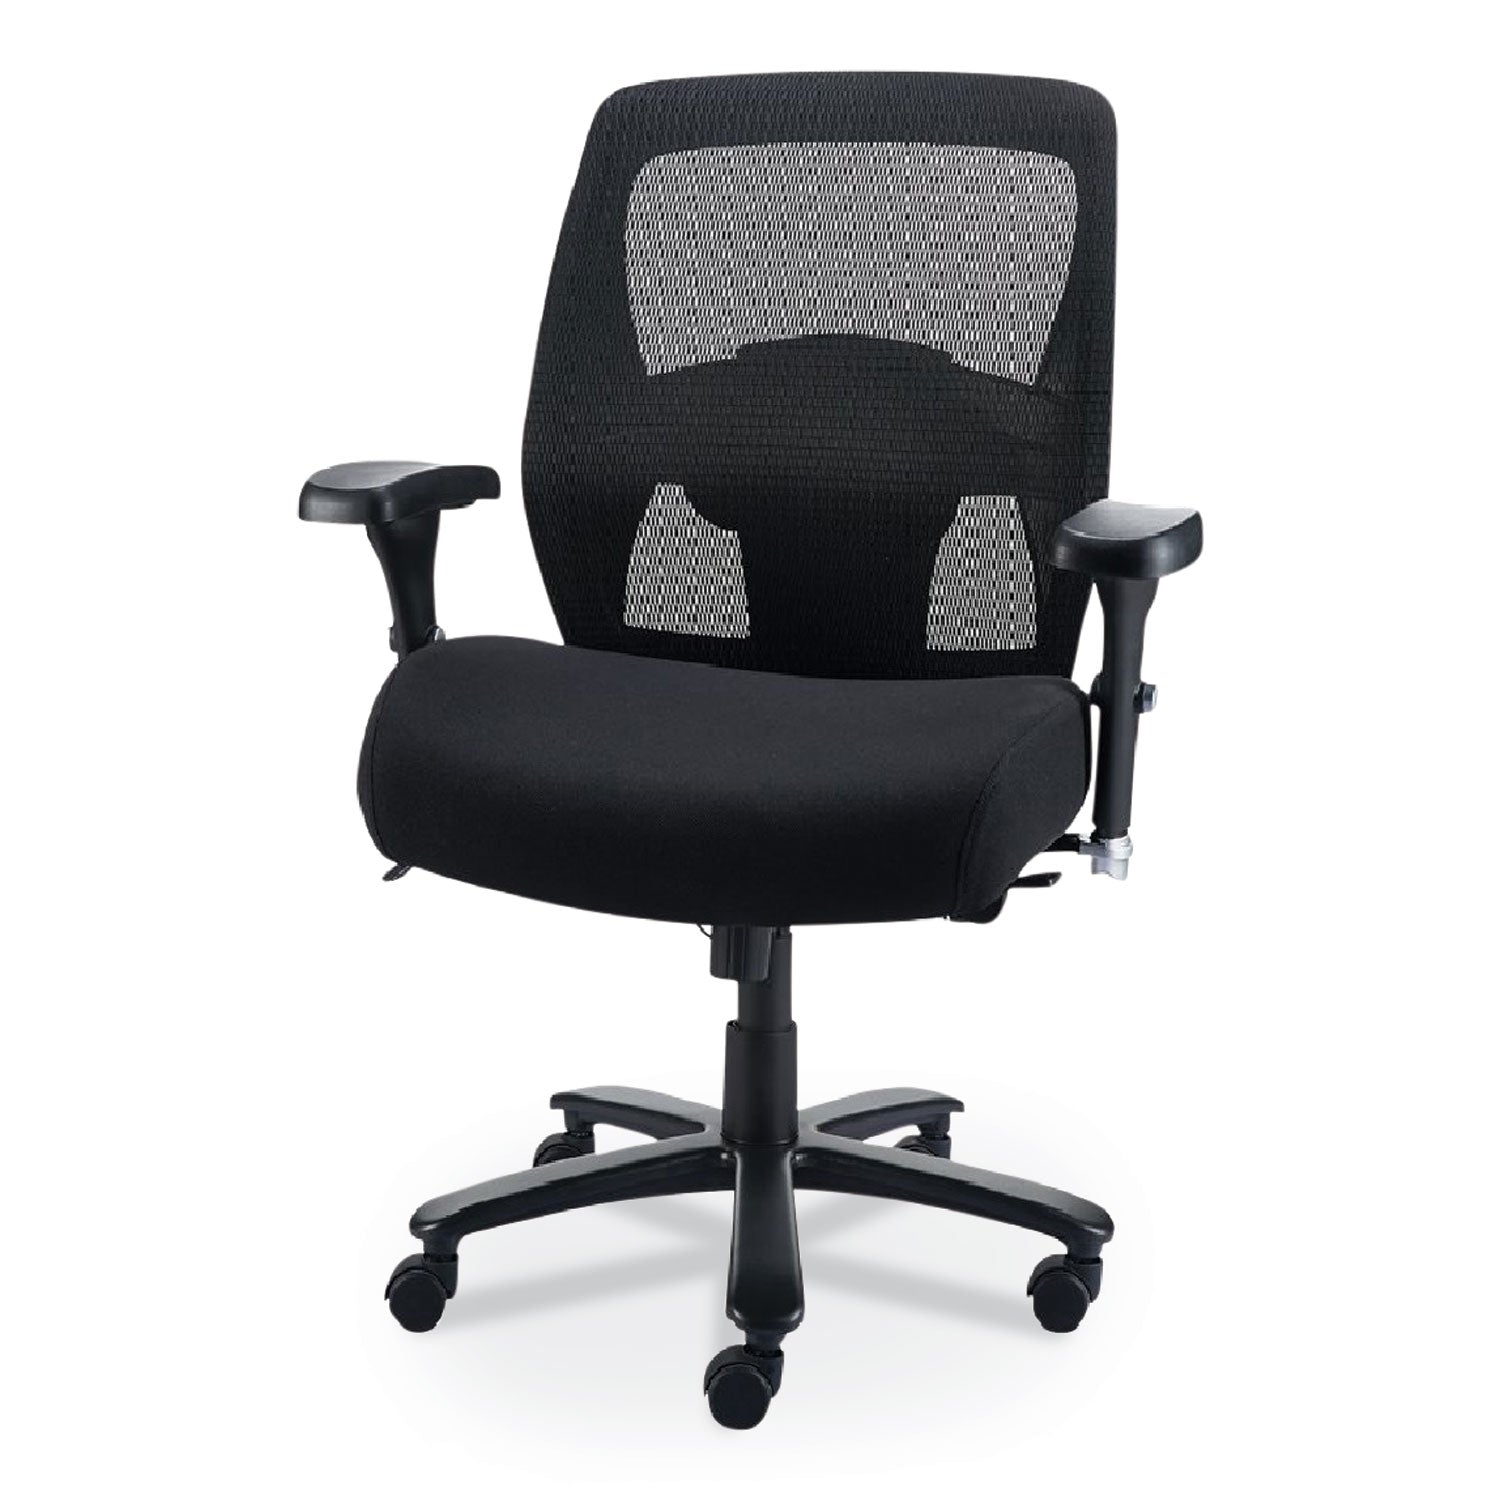 Alera Faseny Series Big and Tall Manager Chair, Supports Up to 400 lbs, 17.48" to 21.73" Seat Height, Black Seat/Back/Base - 3